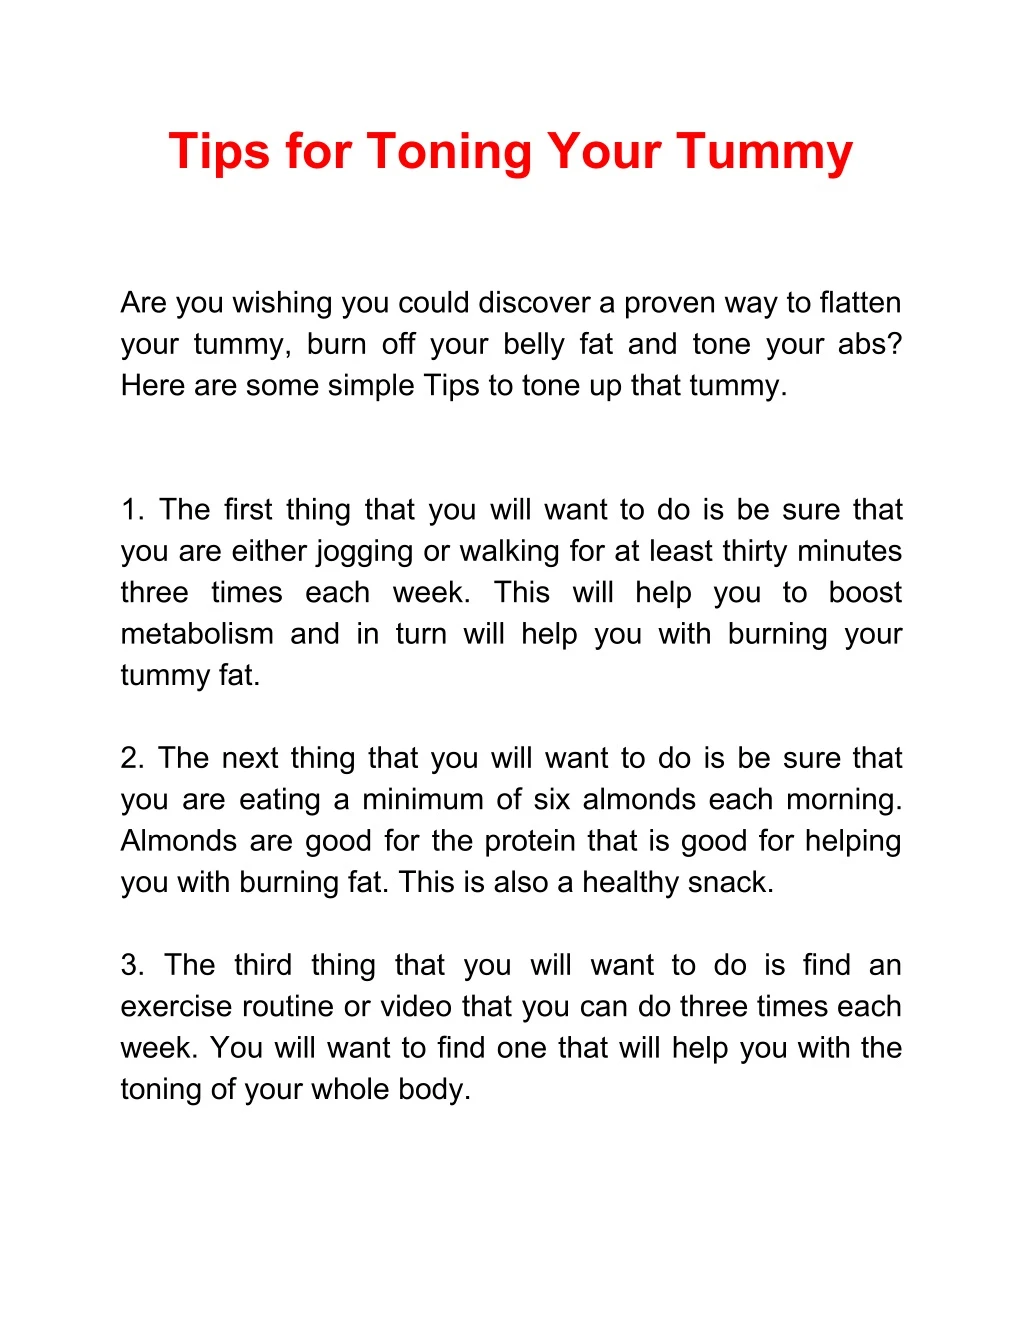 tips for toning your tummy n.